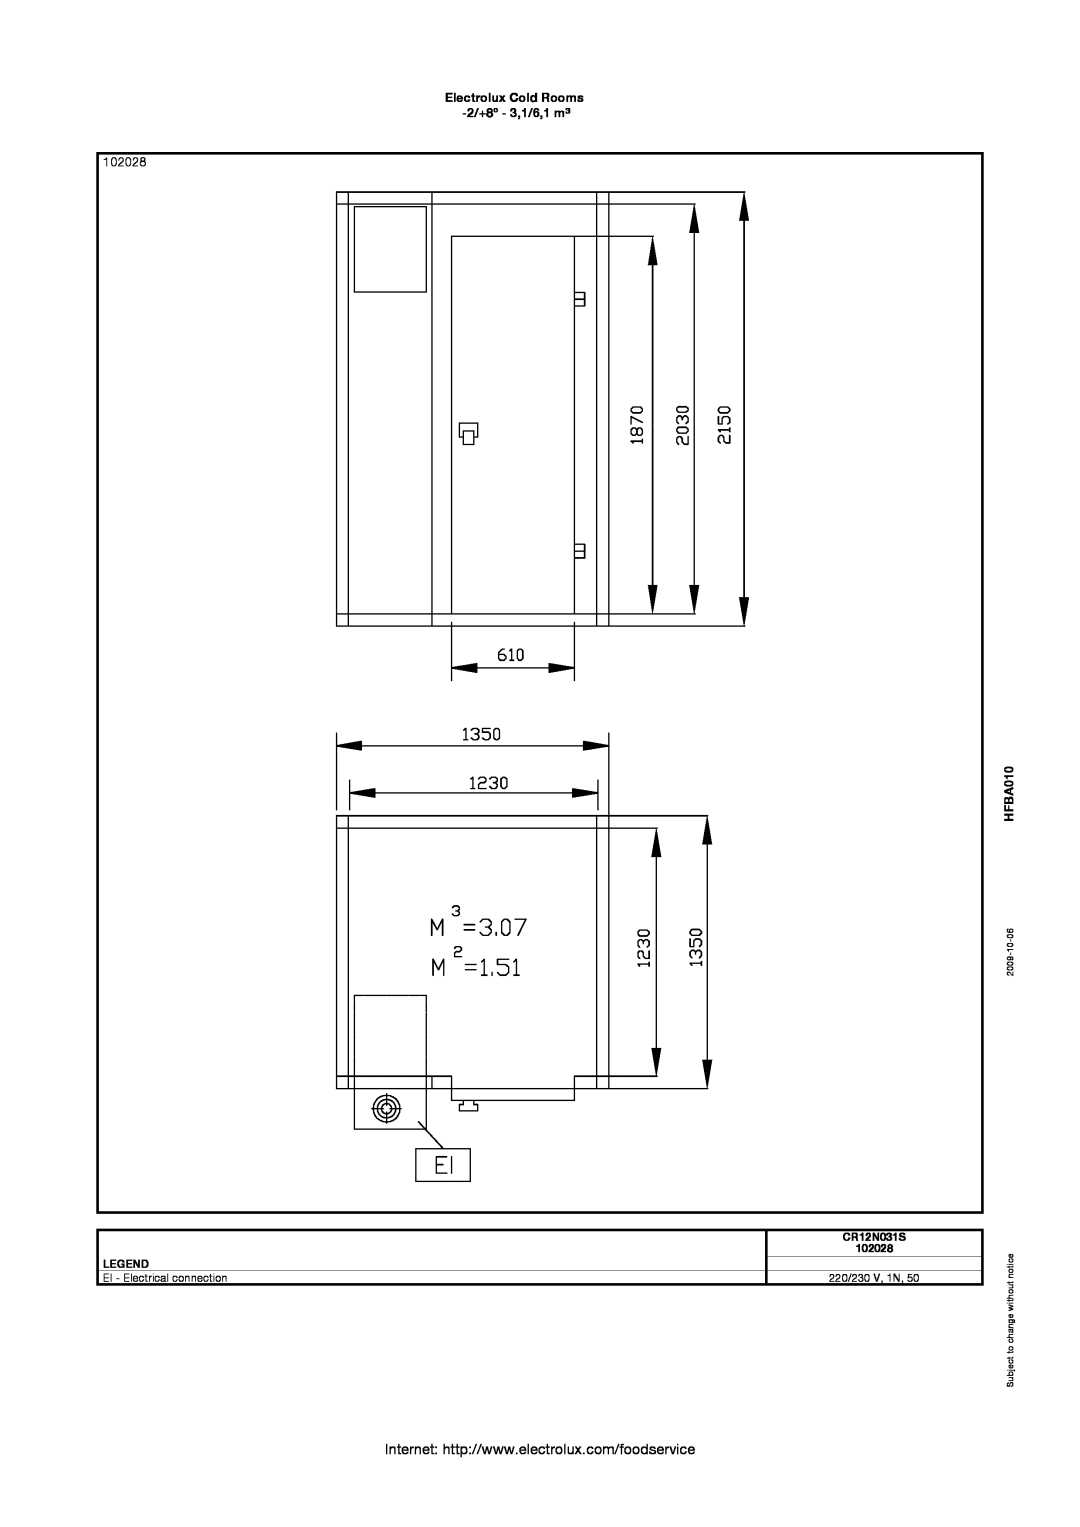 Electrolux CR20N051S 102028, Electrolux Cold Rooms -2/+8º - 3,1/6,1 m³, HFBA010, CR12N031S, EI - Electrical connection 